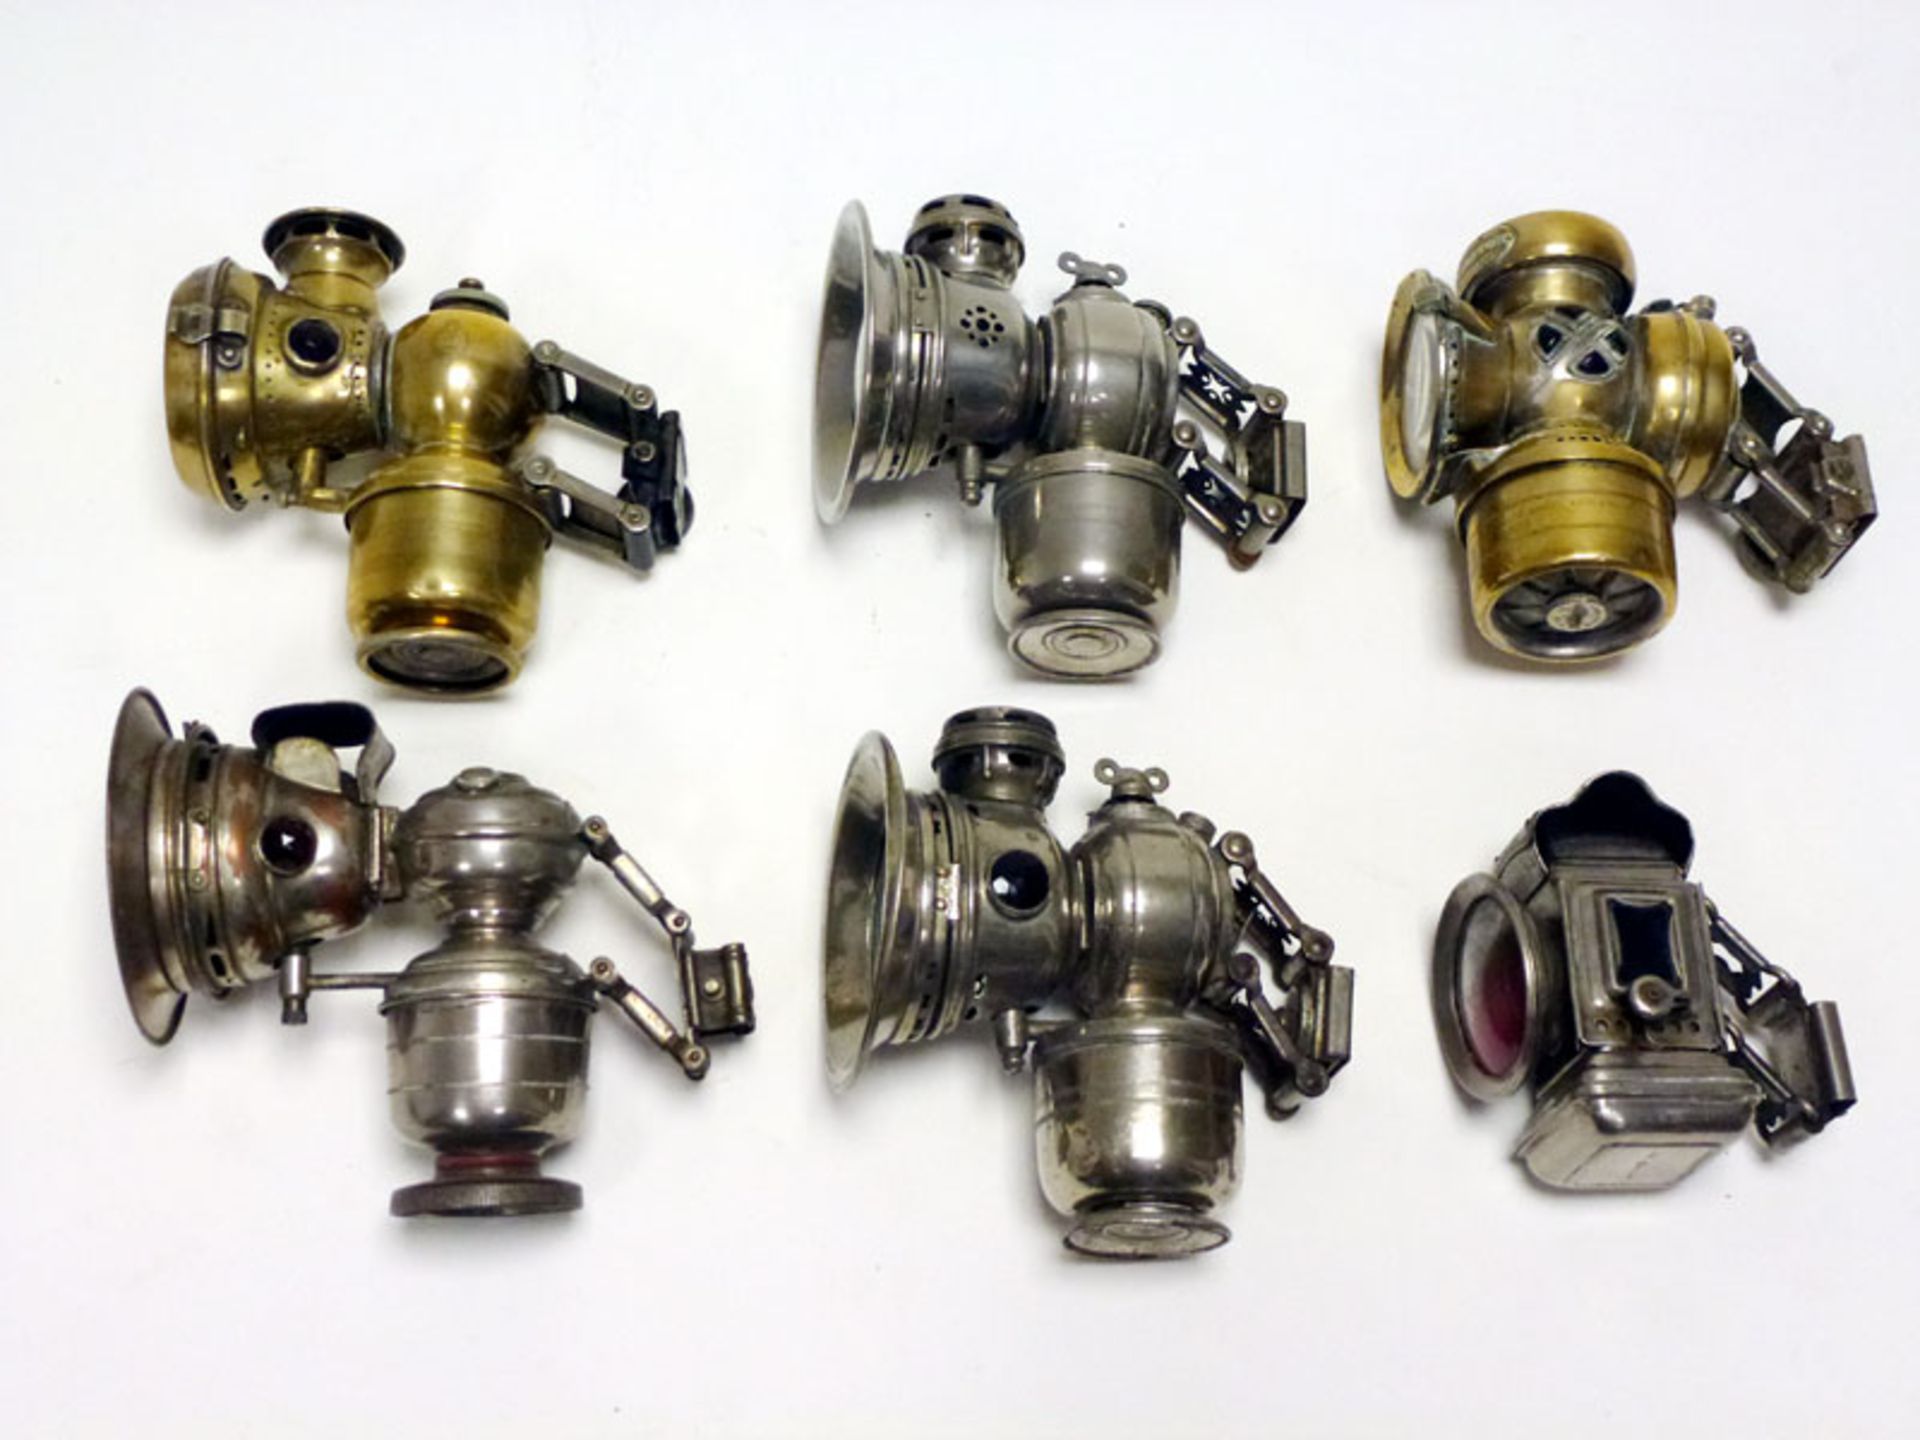 Quantity of Cycle Lamps